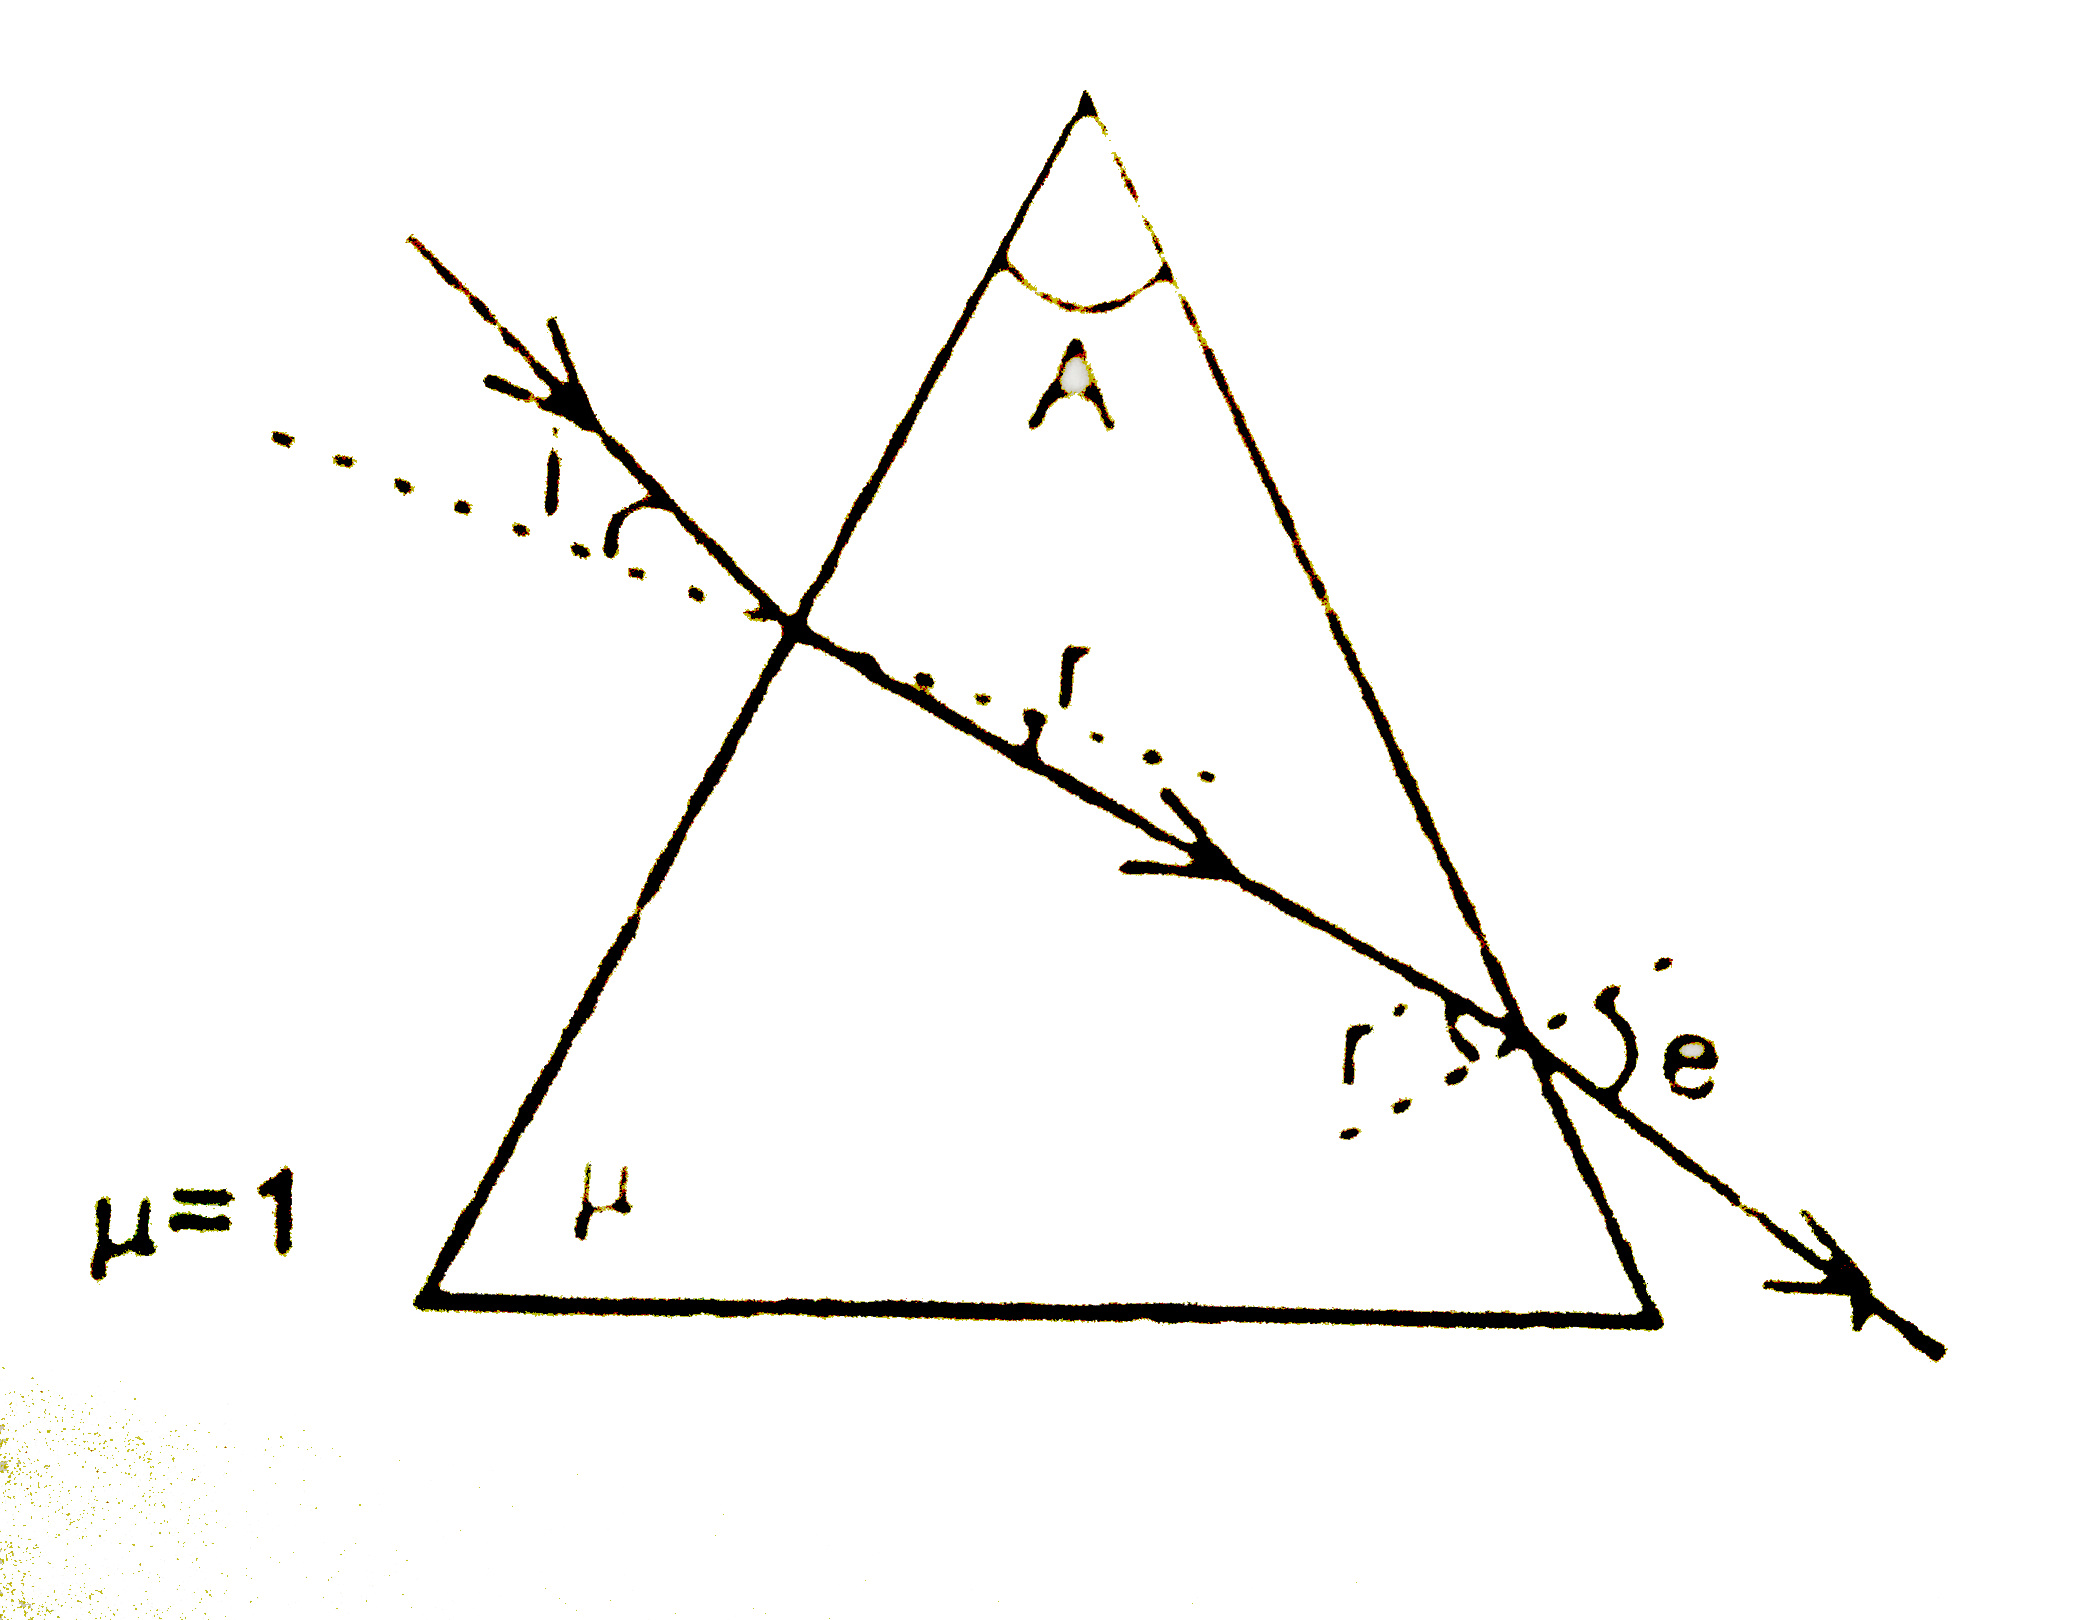 For the case shown in figure  shown in  figure prove the relations r' - r = A and delta = 1 (i-e) + A (do not try these  relations  because  the prism  is normally  not used  on this way).